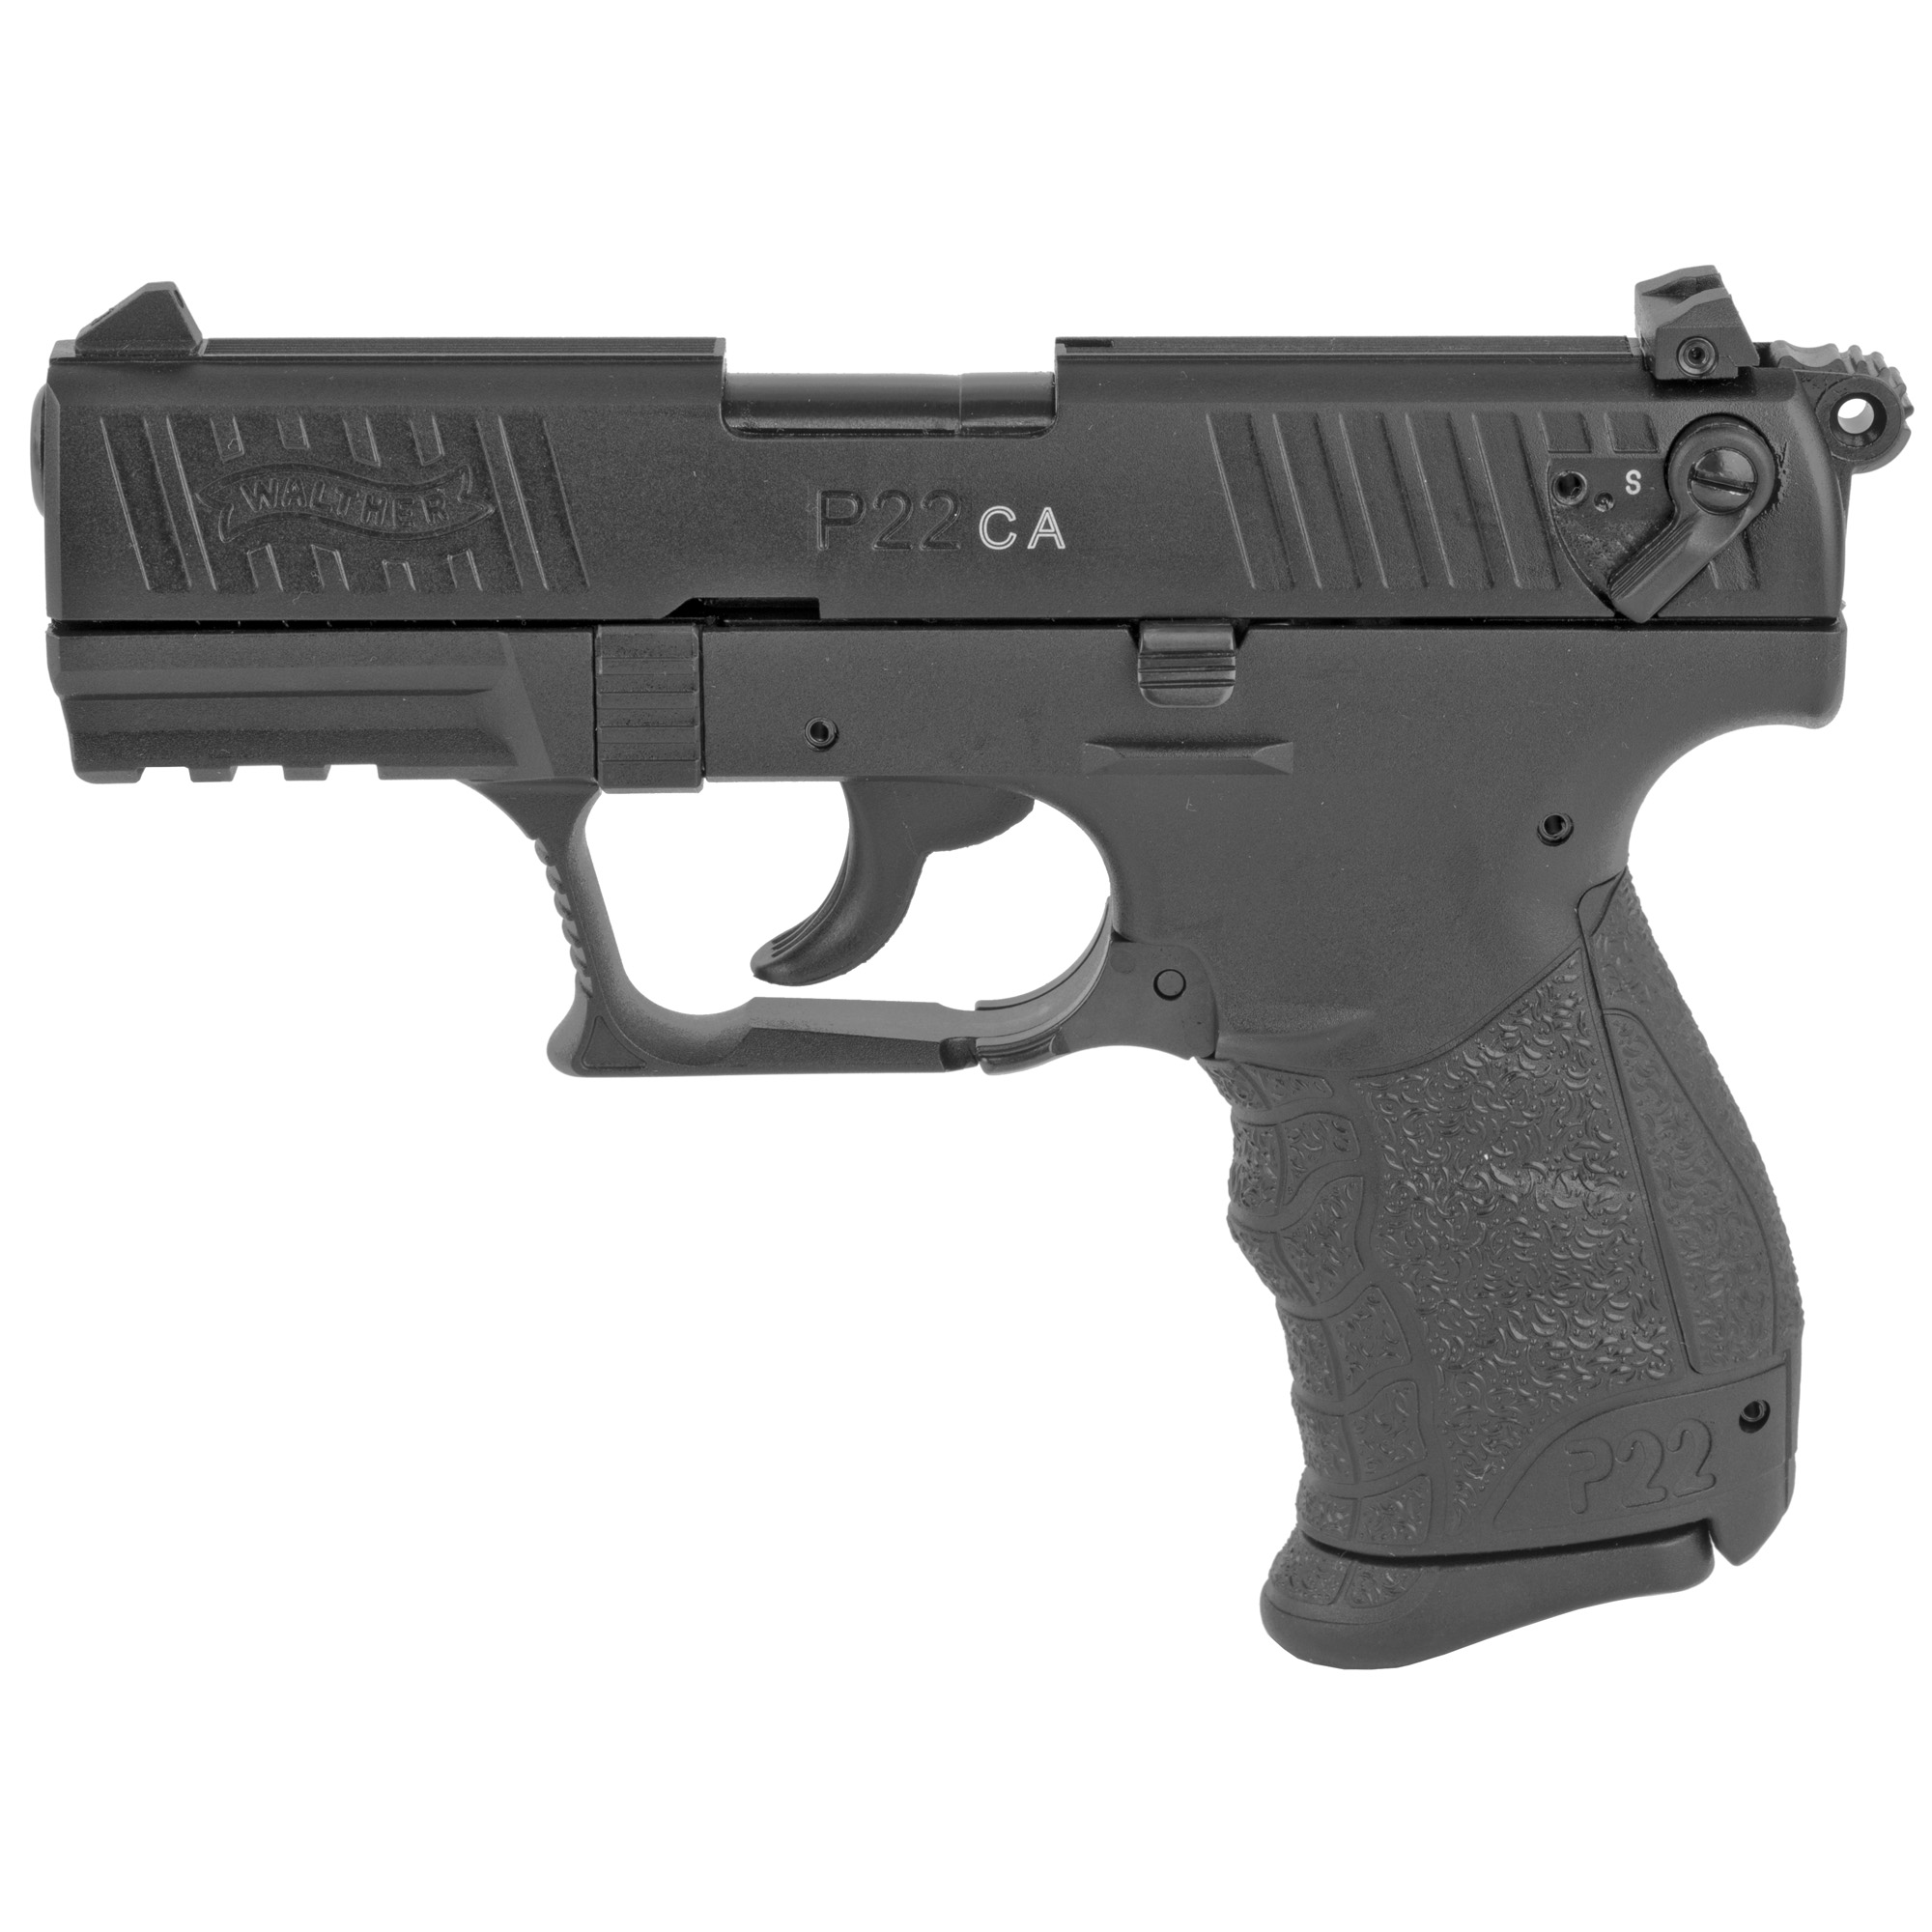 WALTHER P22 22LR 3.4 10RD BLK CA